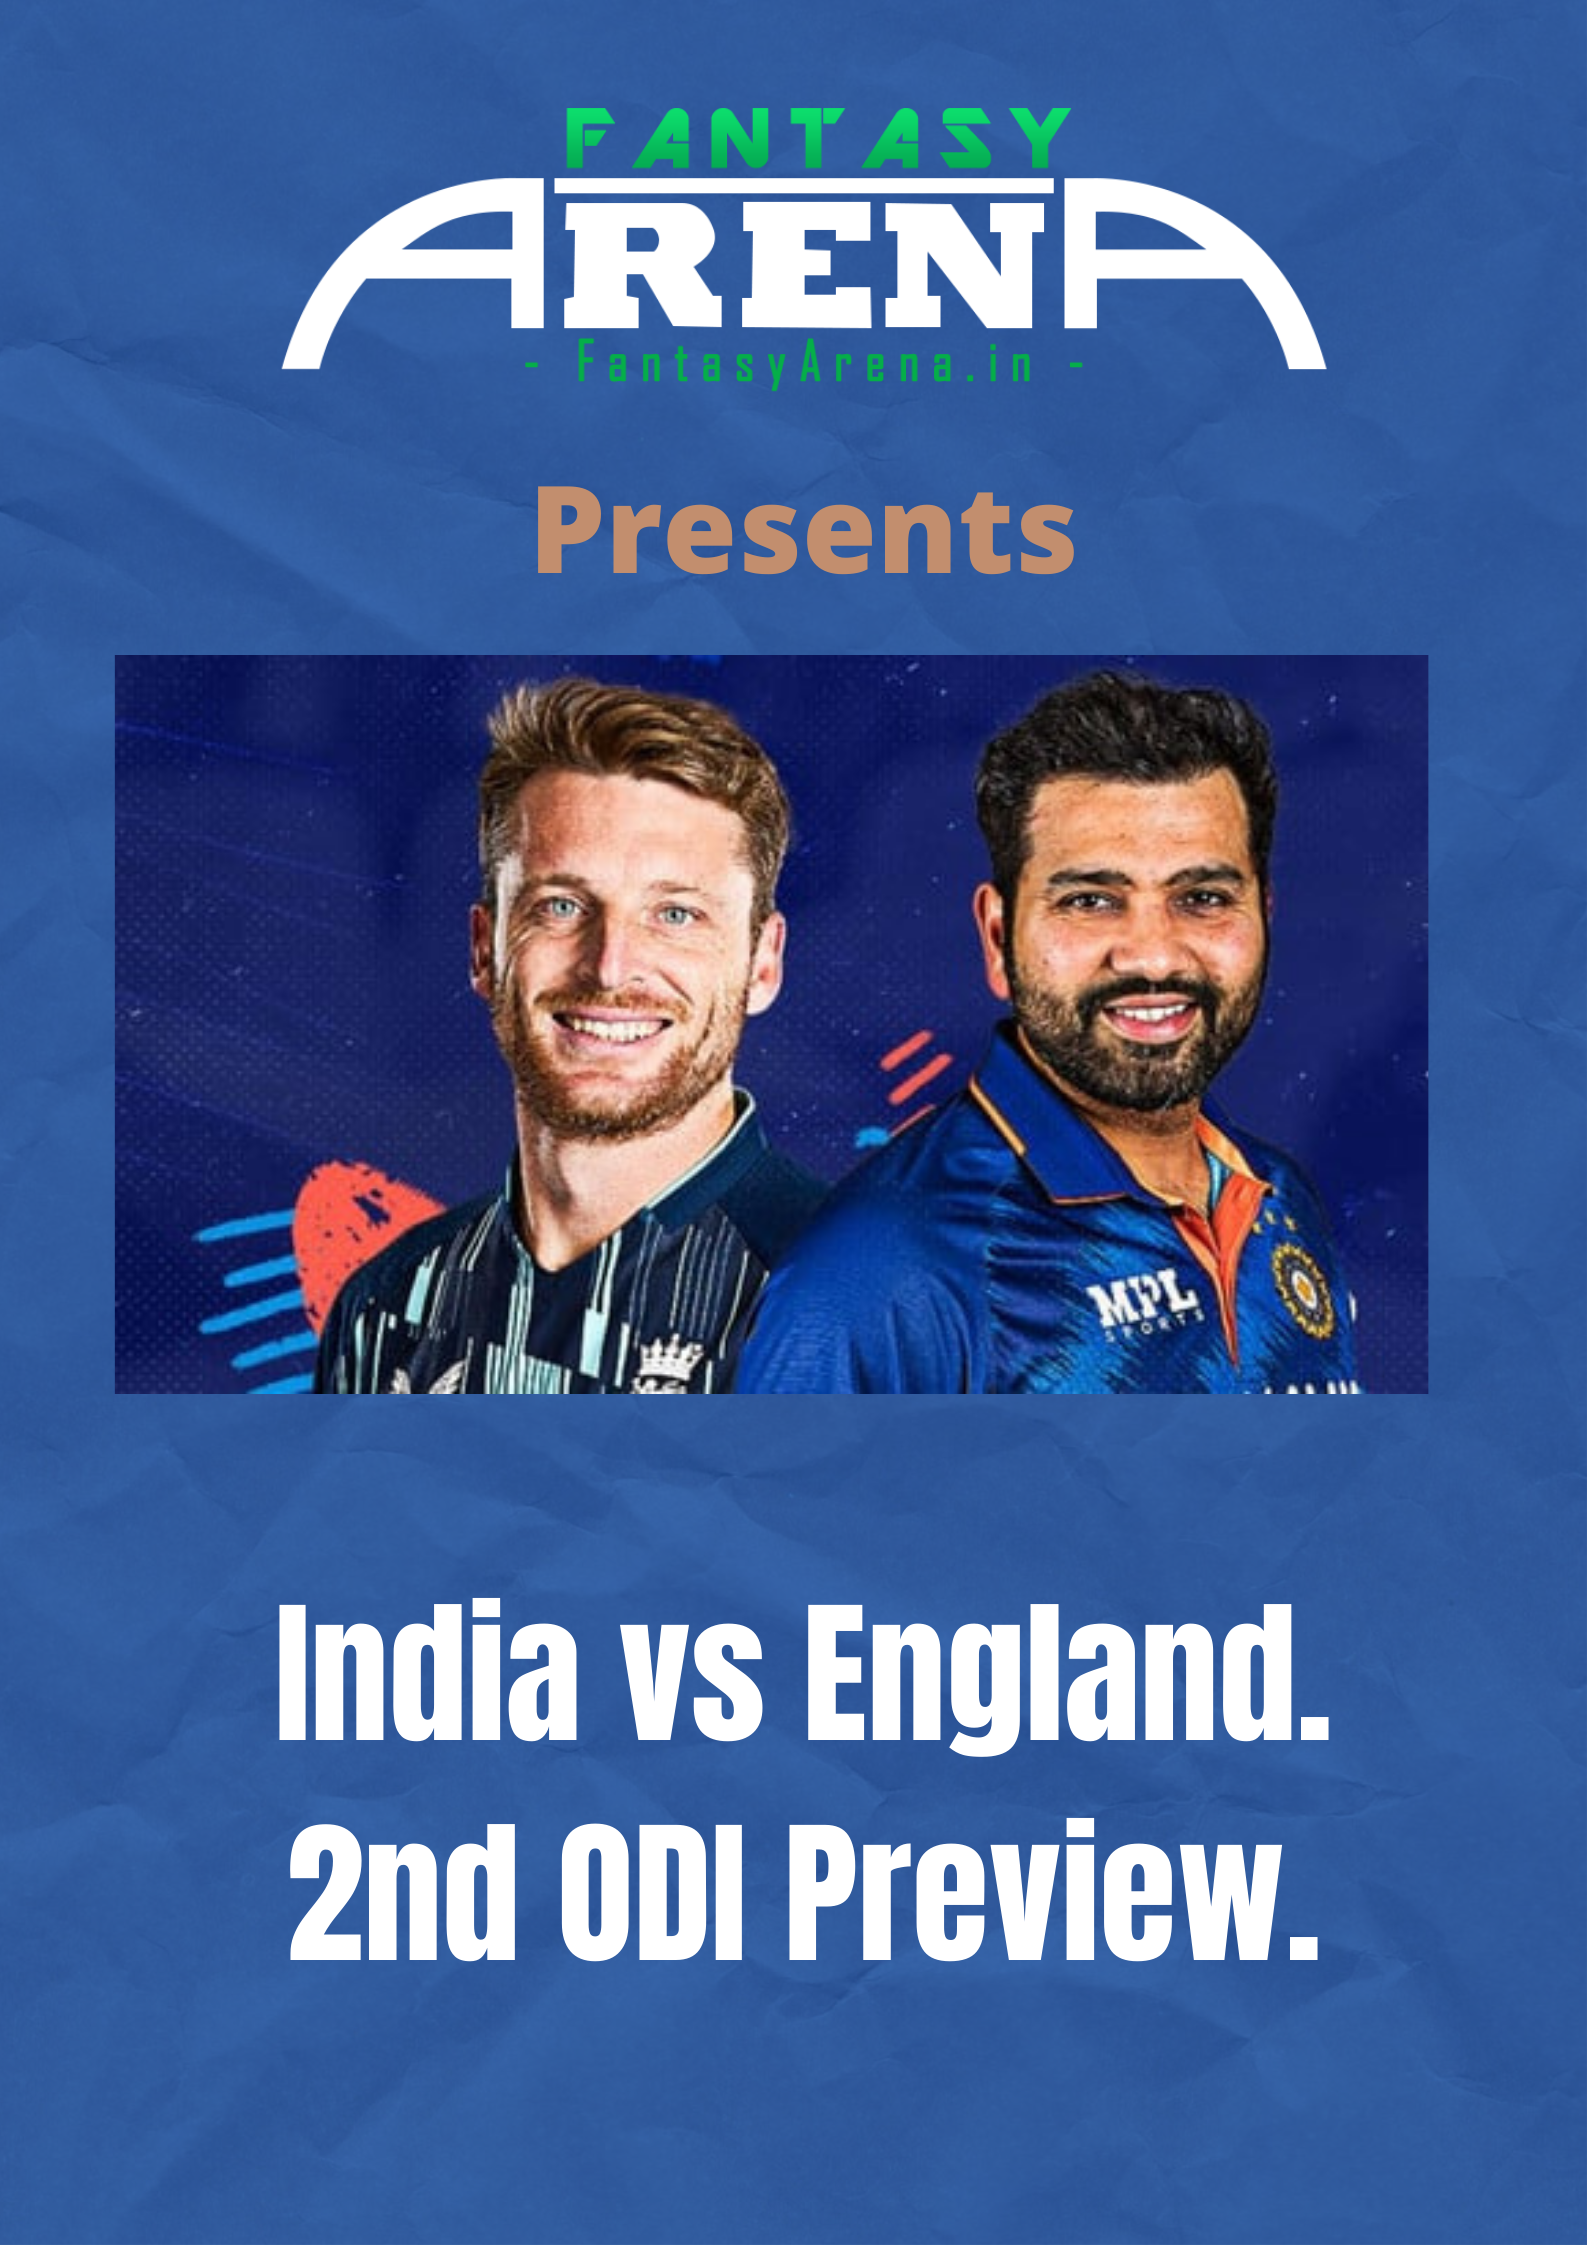 England vs India. 2nd ODI. Match Preview.